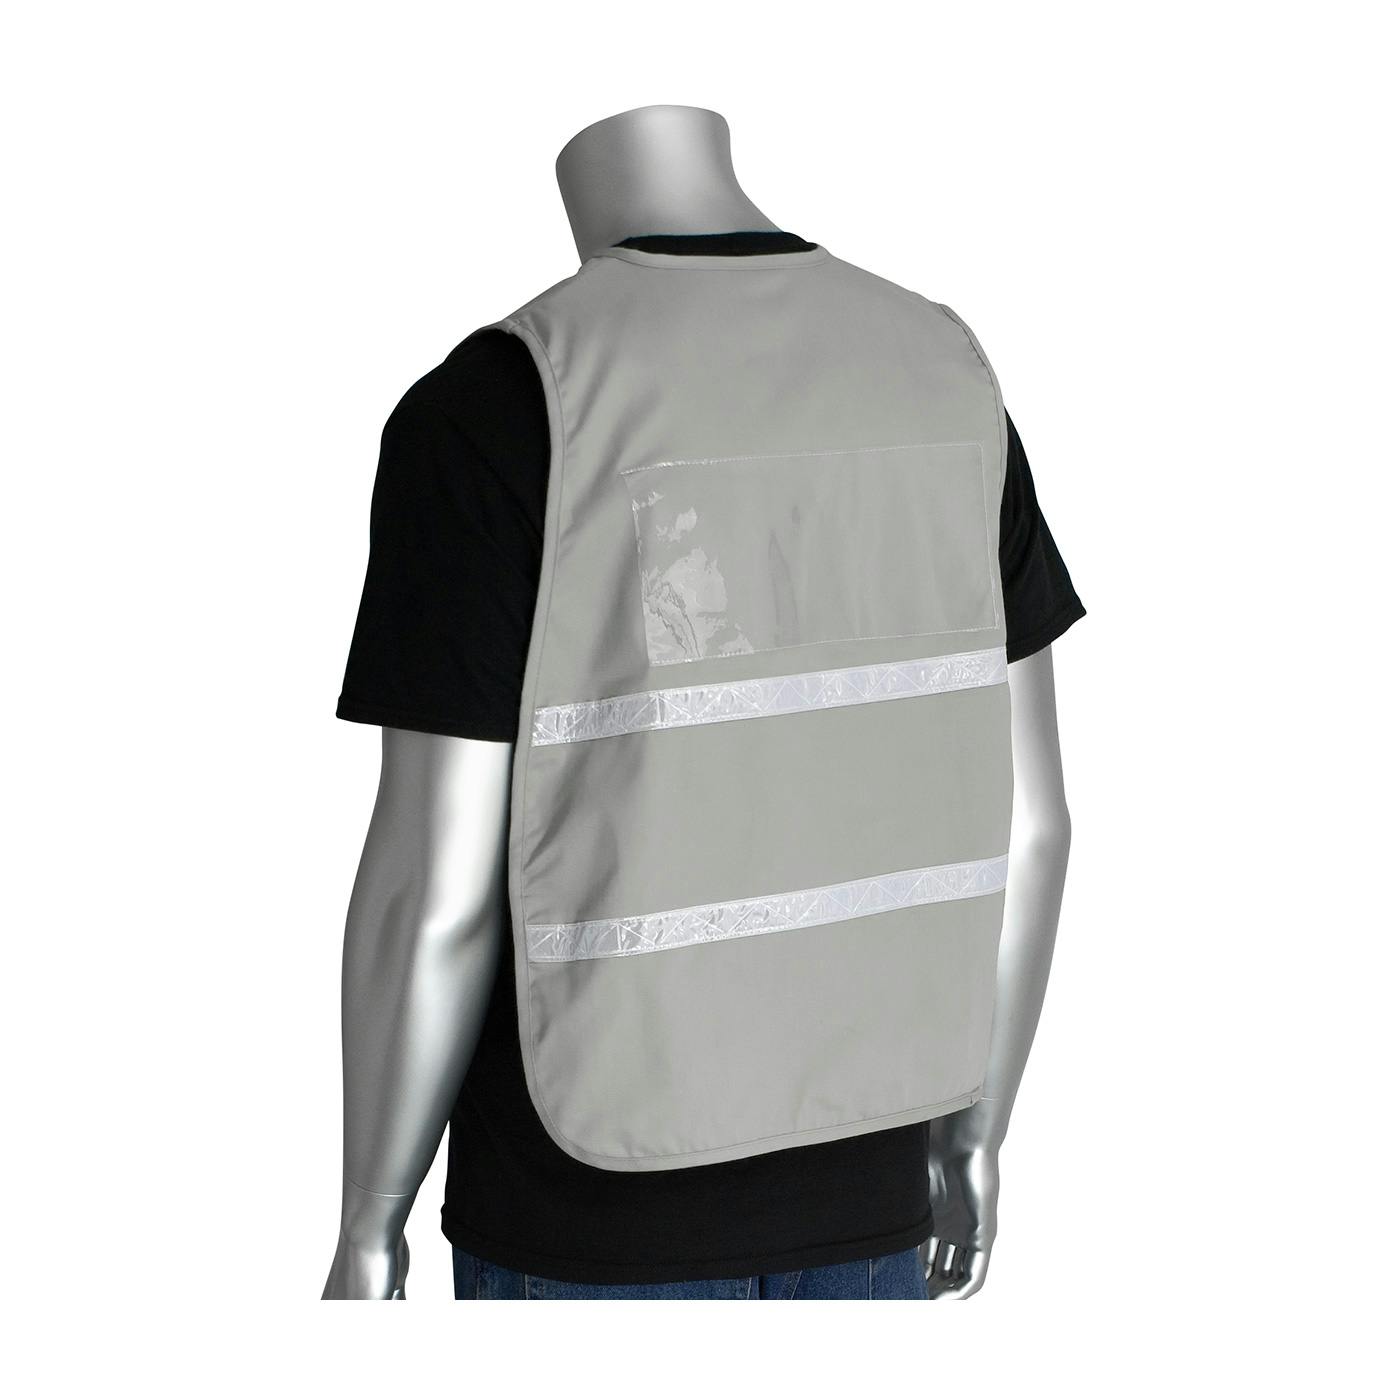 Non-ANSI Incident Command Vest - Cotton/Polyester Blend, Gray (300-2515)